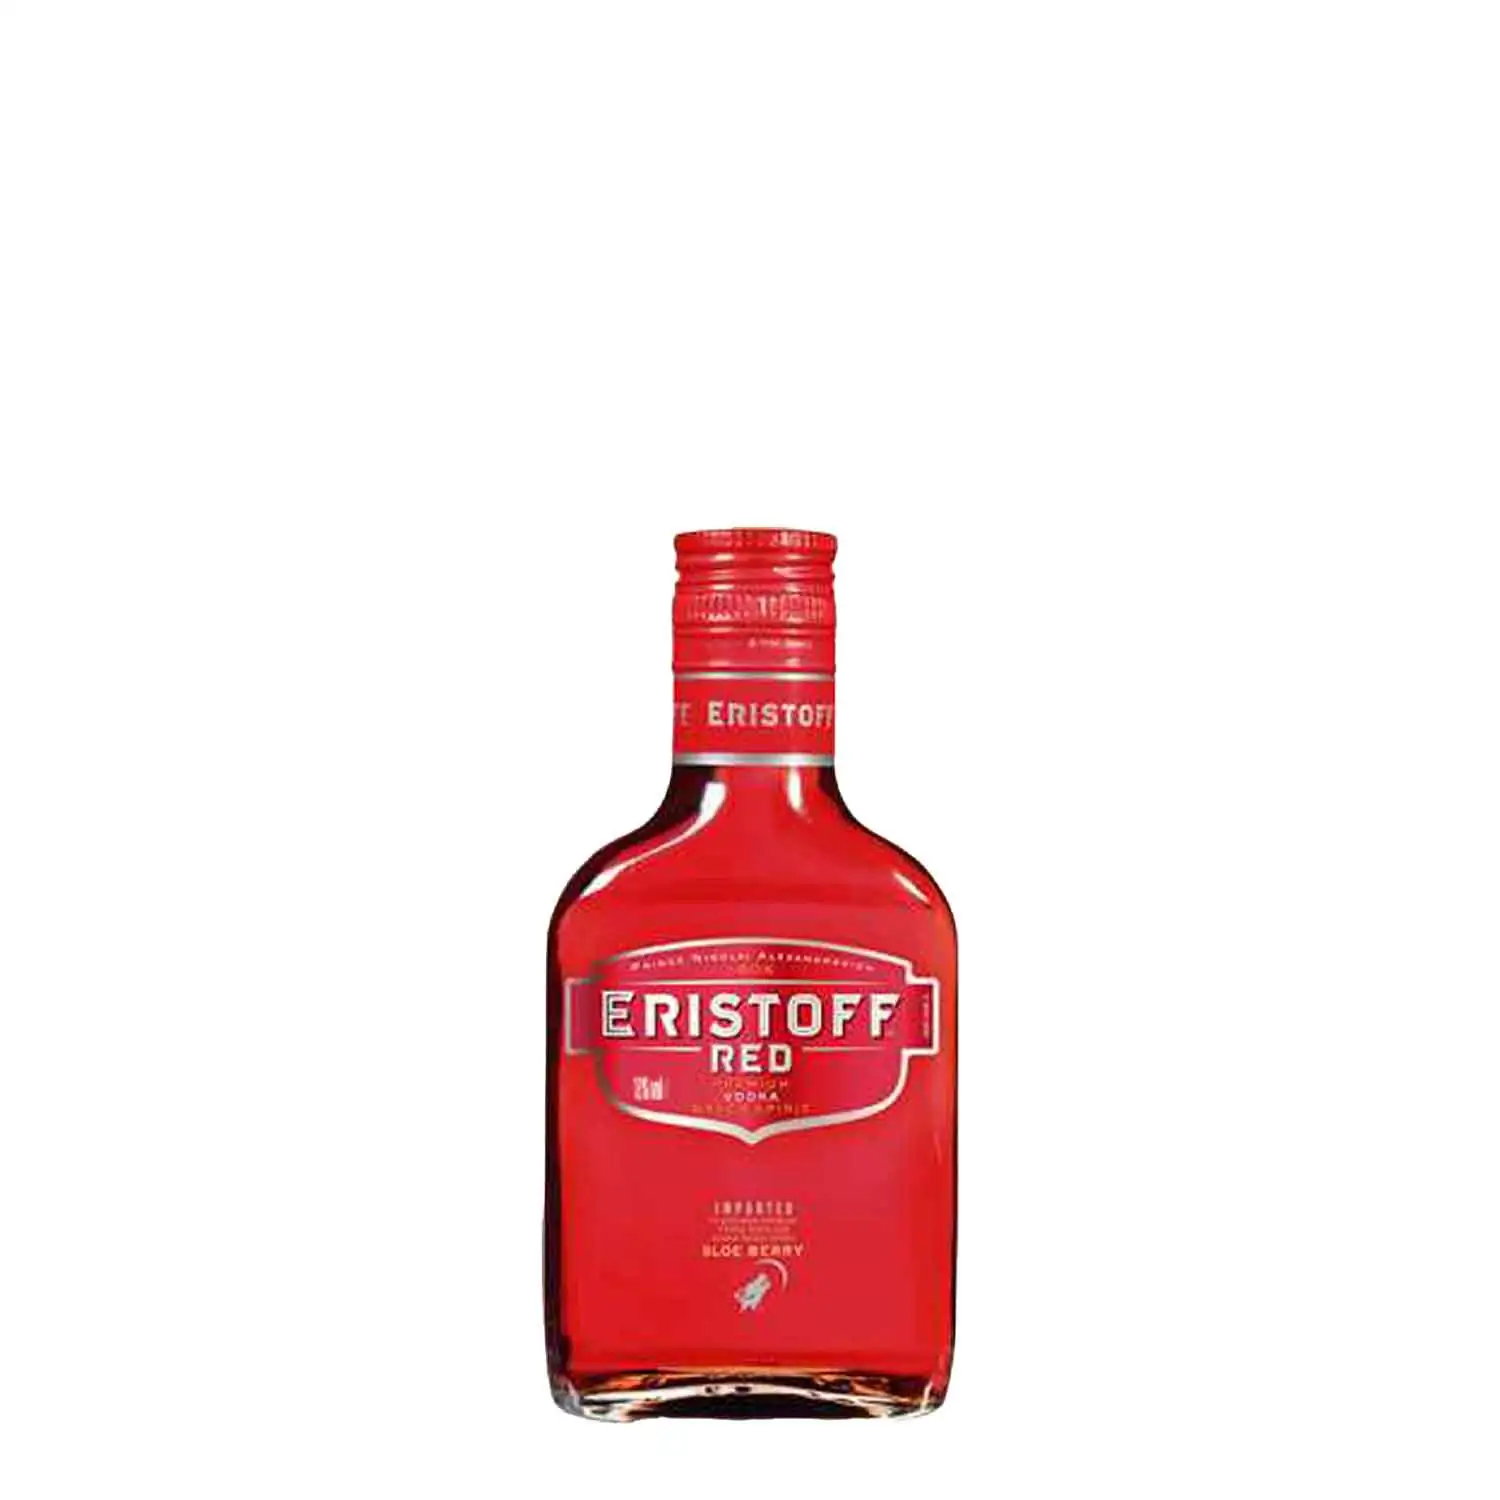 Eristoff red 20cl Alc 18% - Buy at Real Tobacco